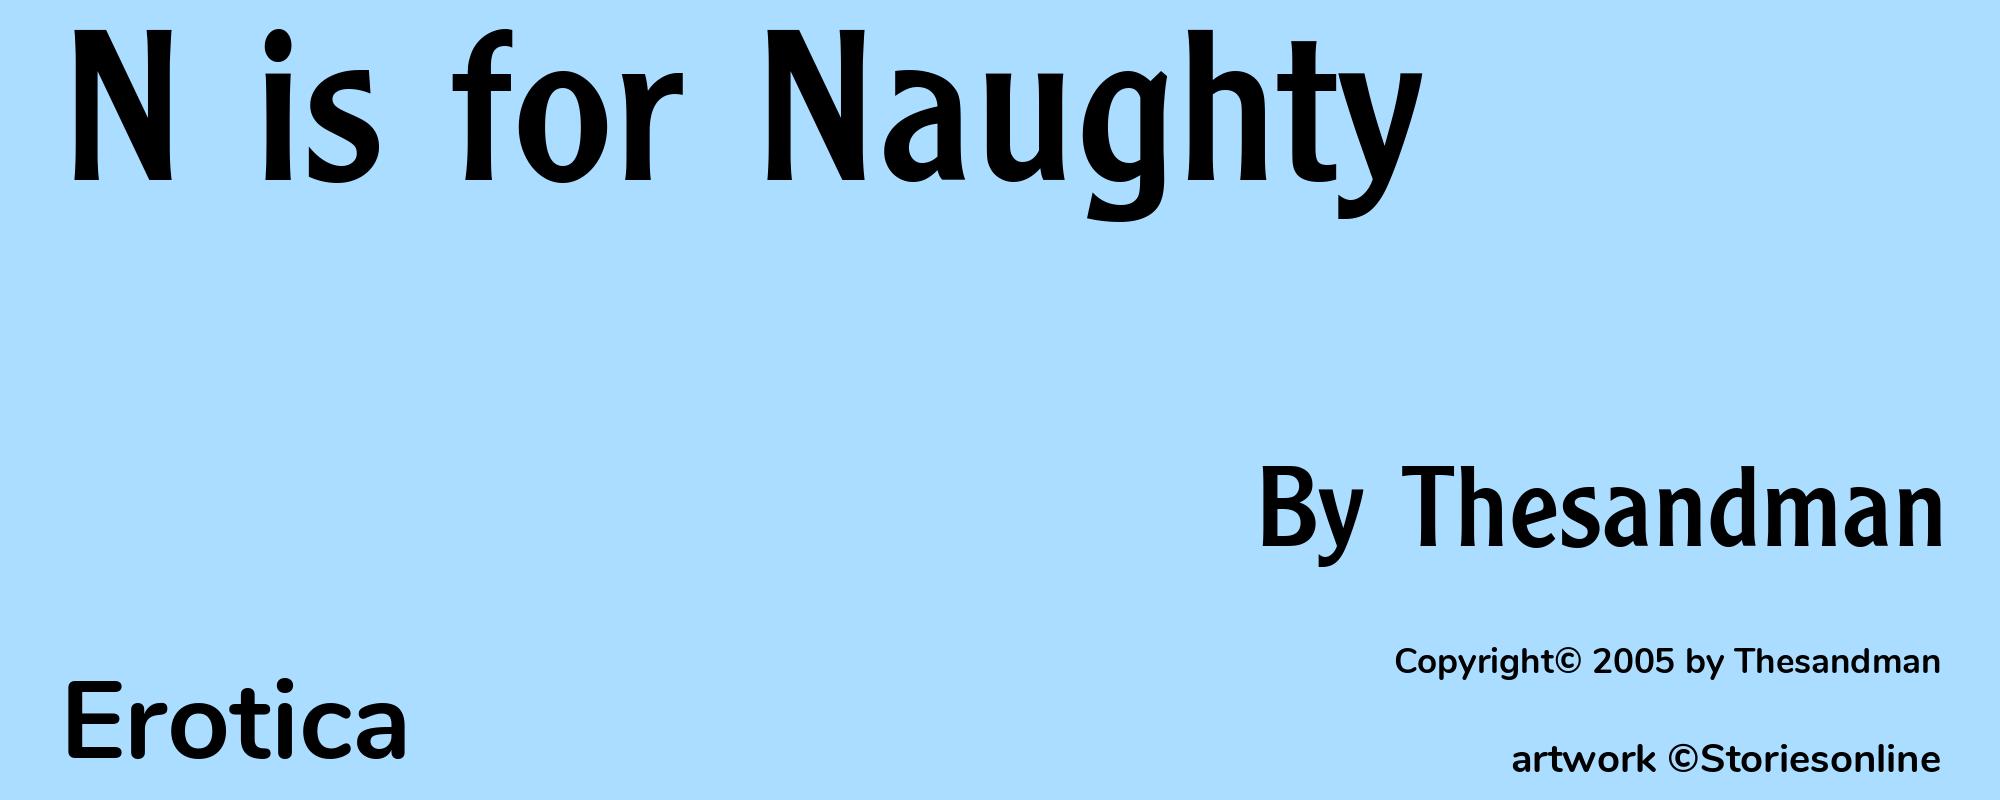 N is for Naughty - Cover